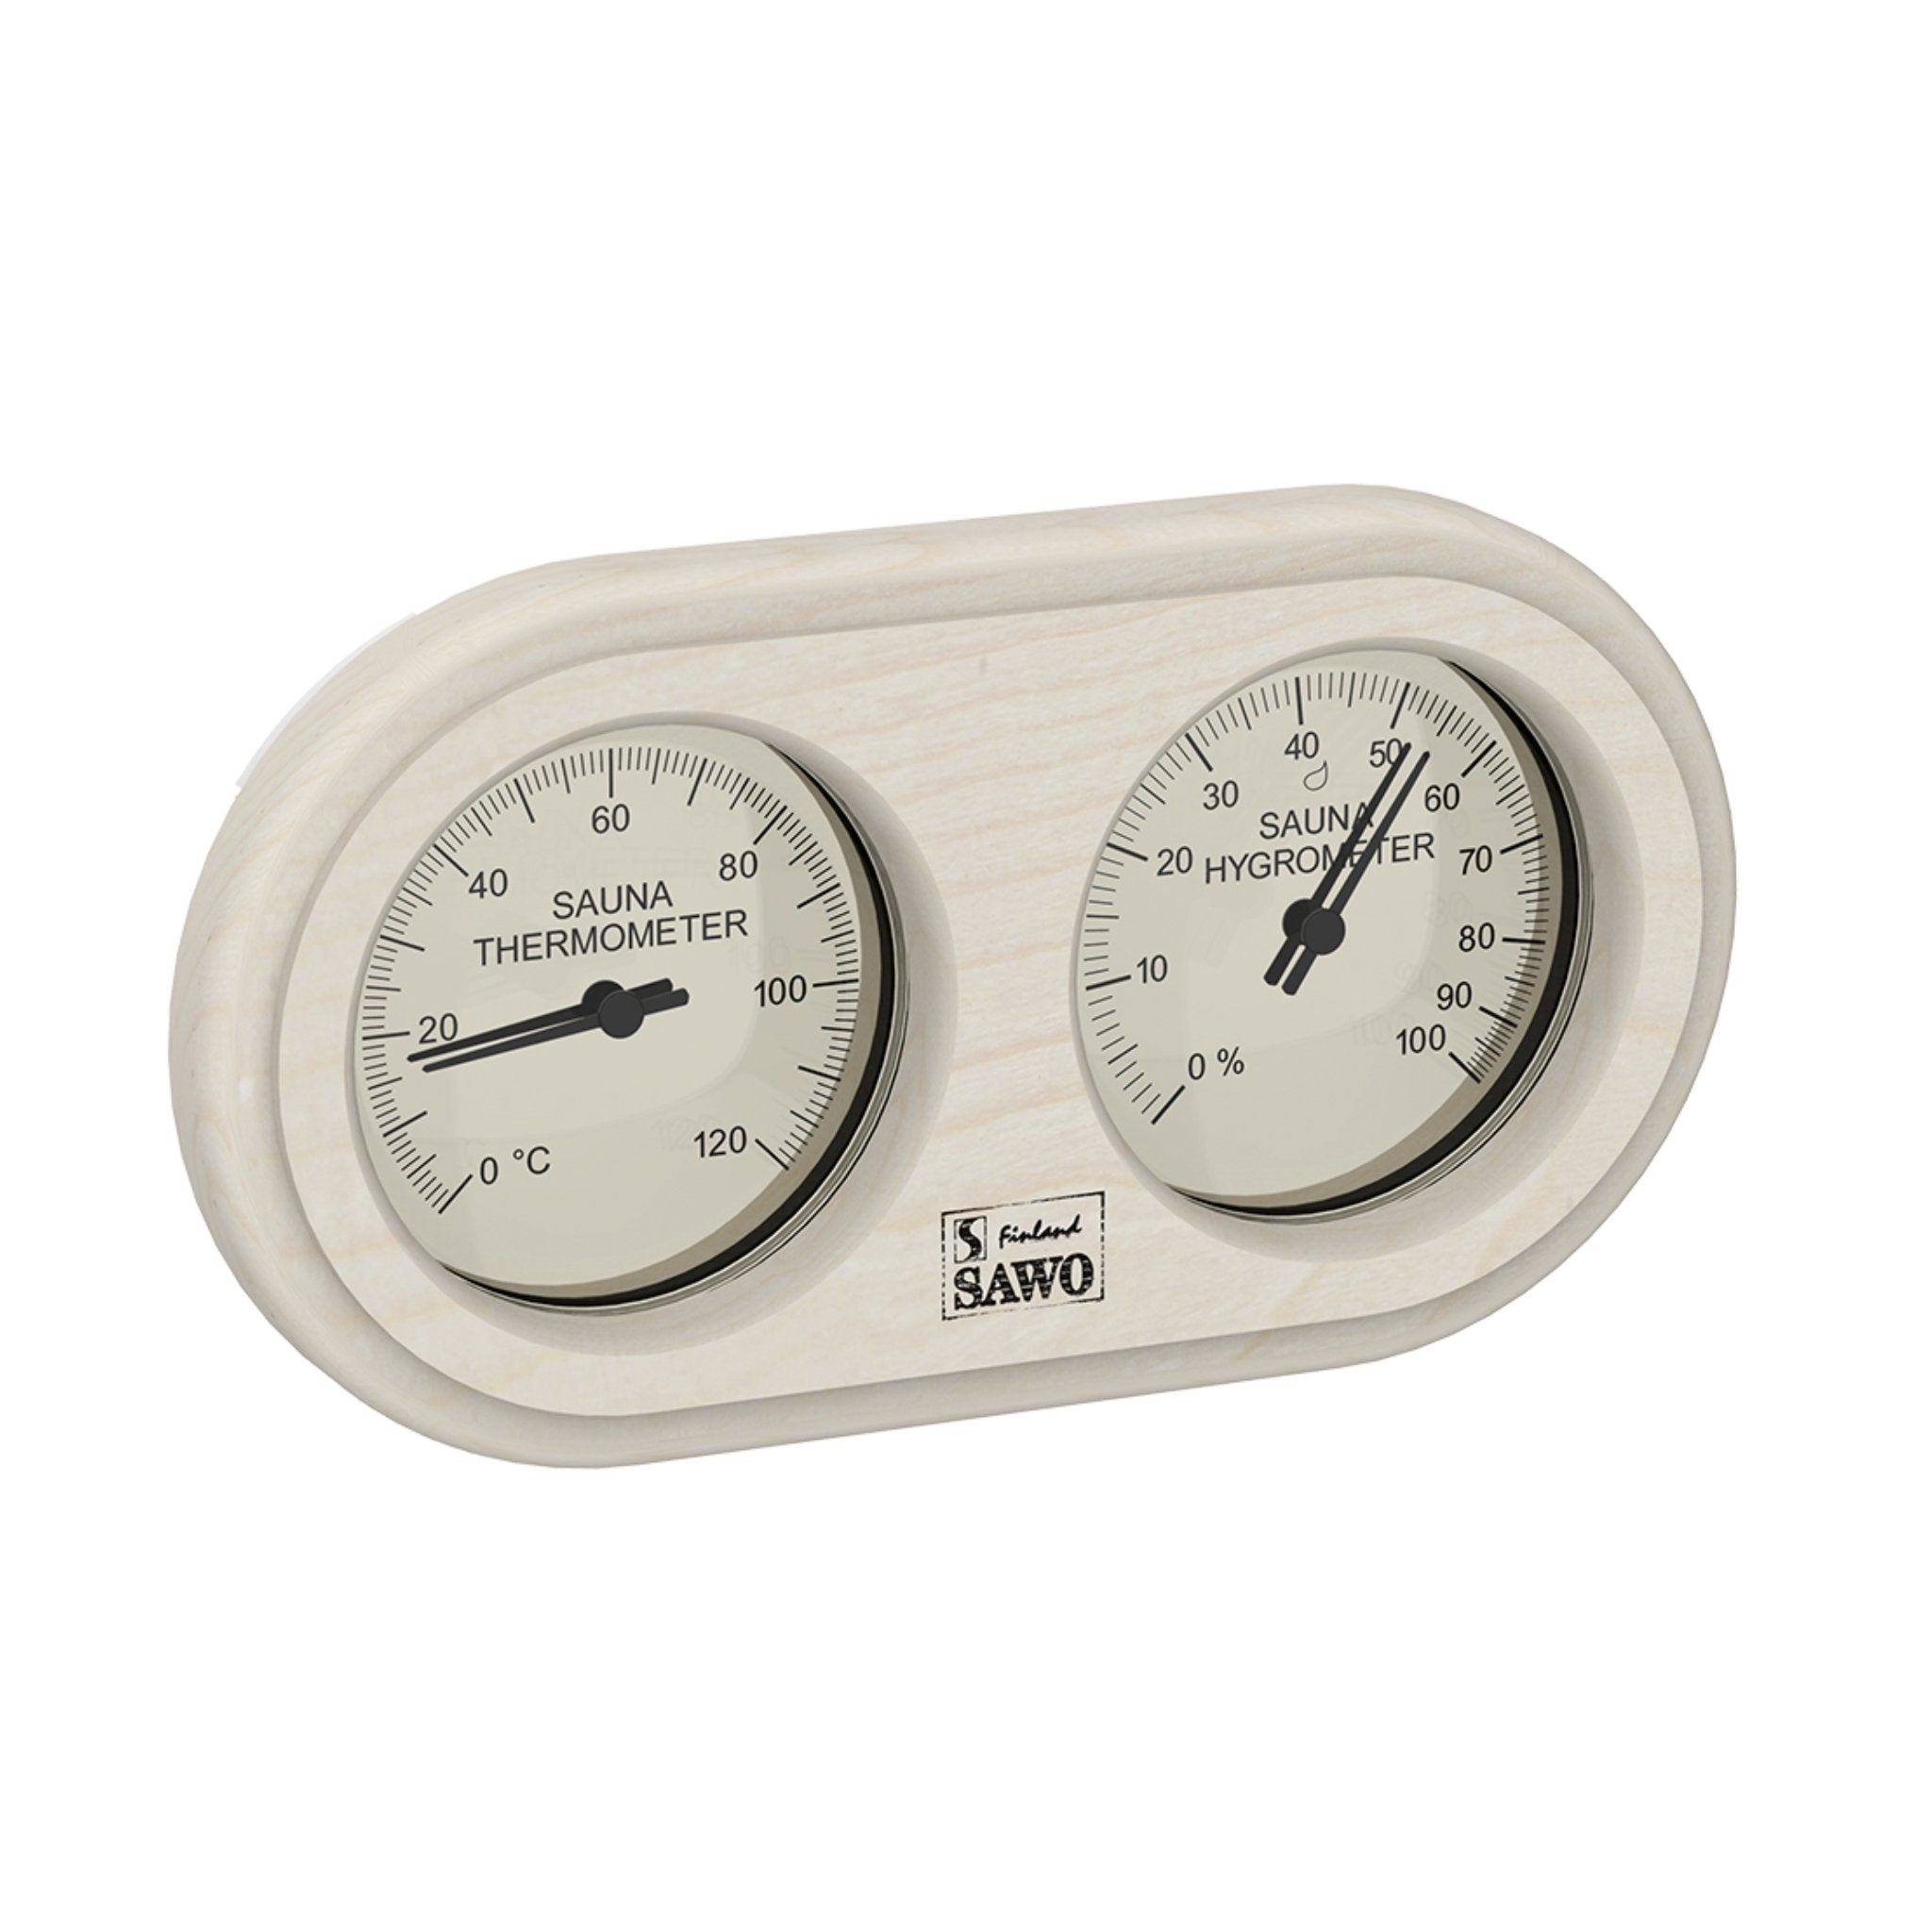 Rounded Style Sauna Thermometer & Hygrometer Aspen Sauna Thermometer | Finnmark Sauna